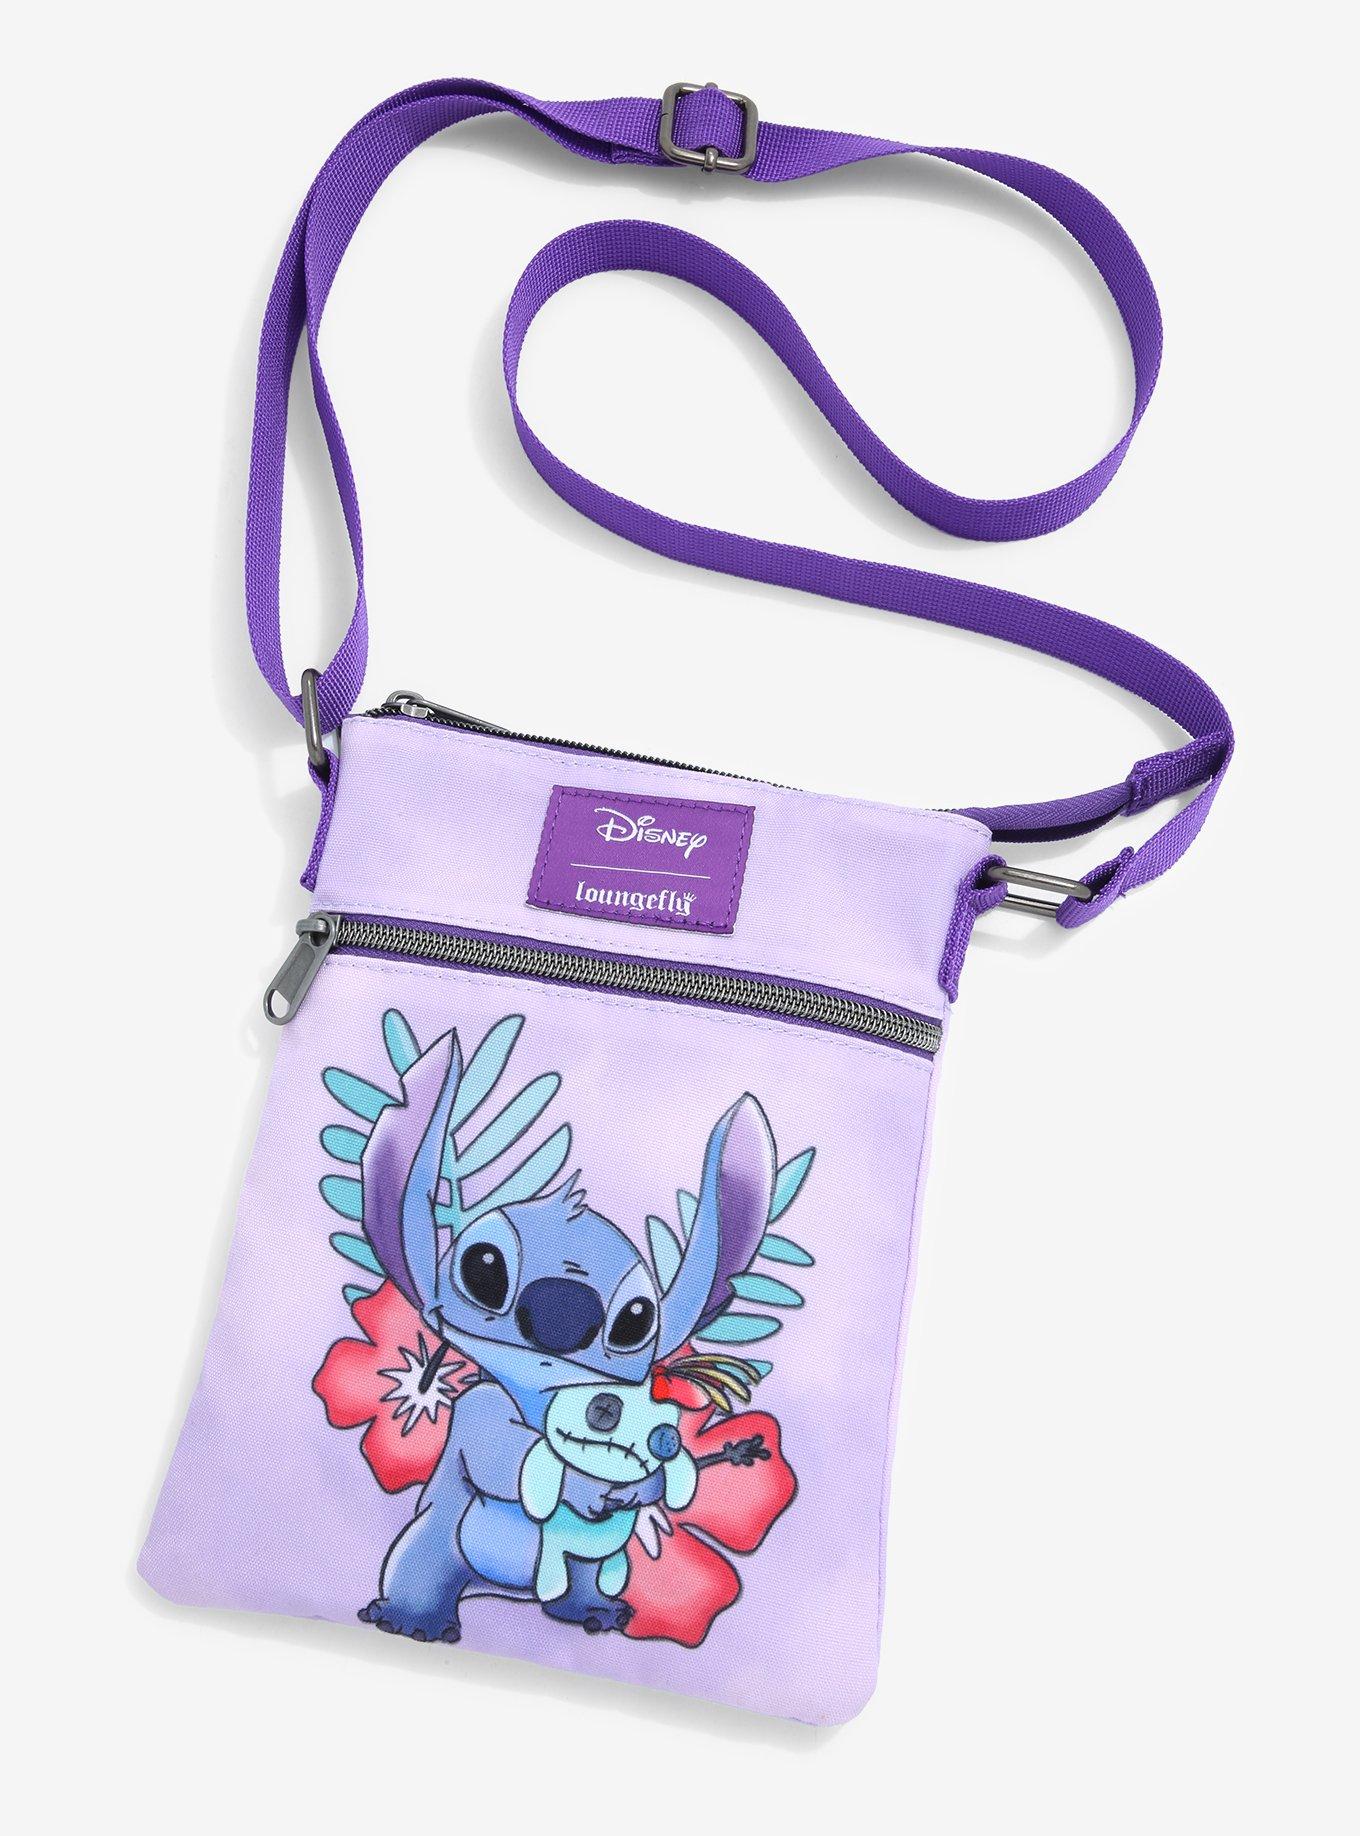 Add a Little Sunshine To Your Life With This Adorable Stitch Crossbody Bag  